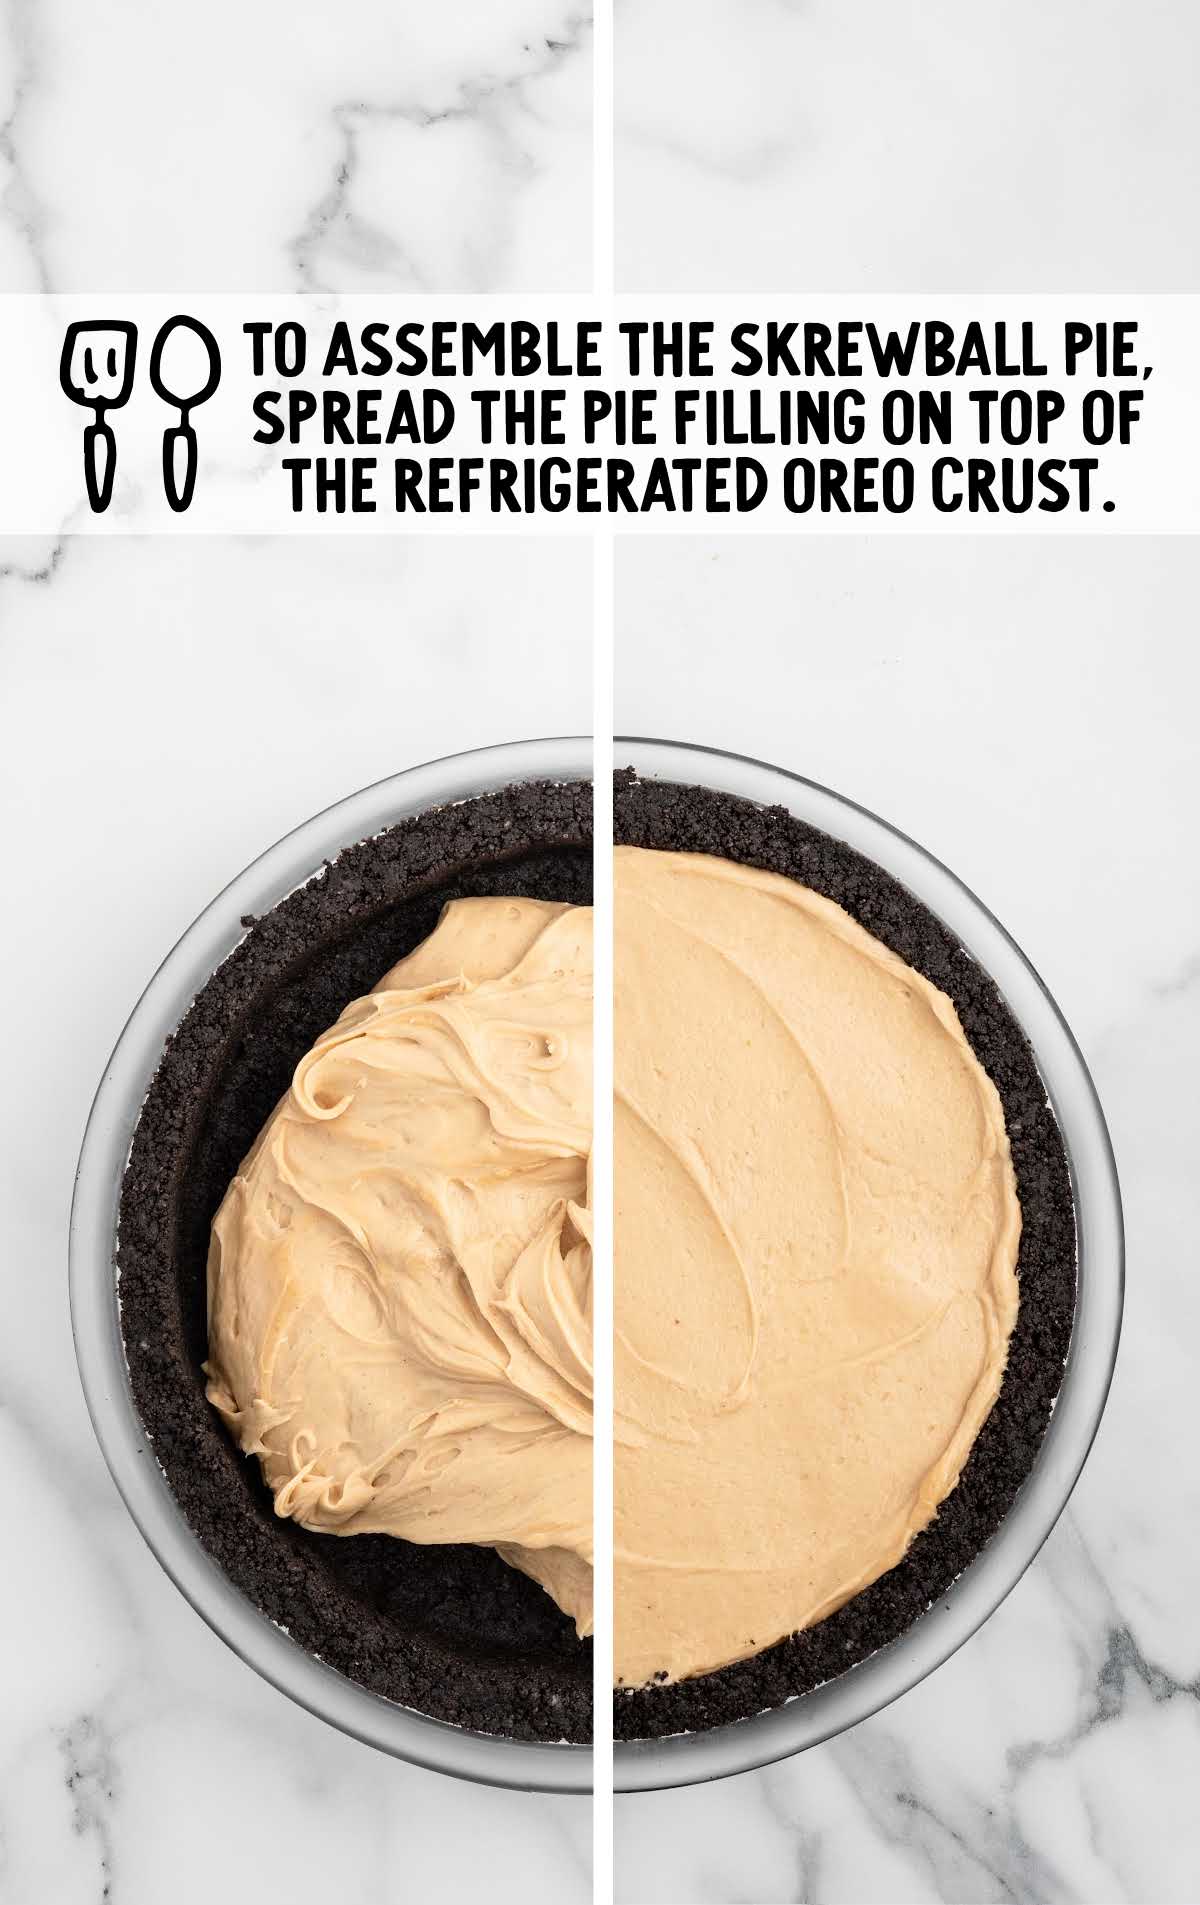 peanut butter filling spread evenly onto the oreo pie crust